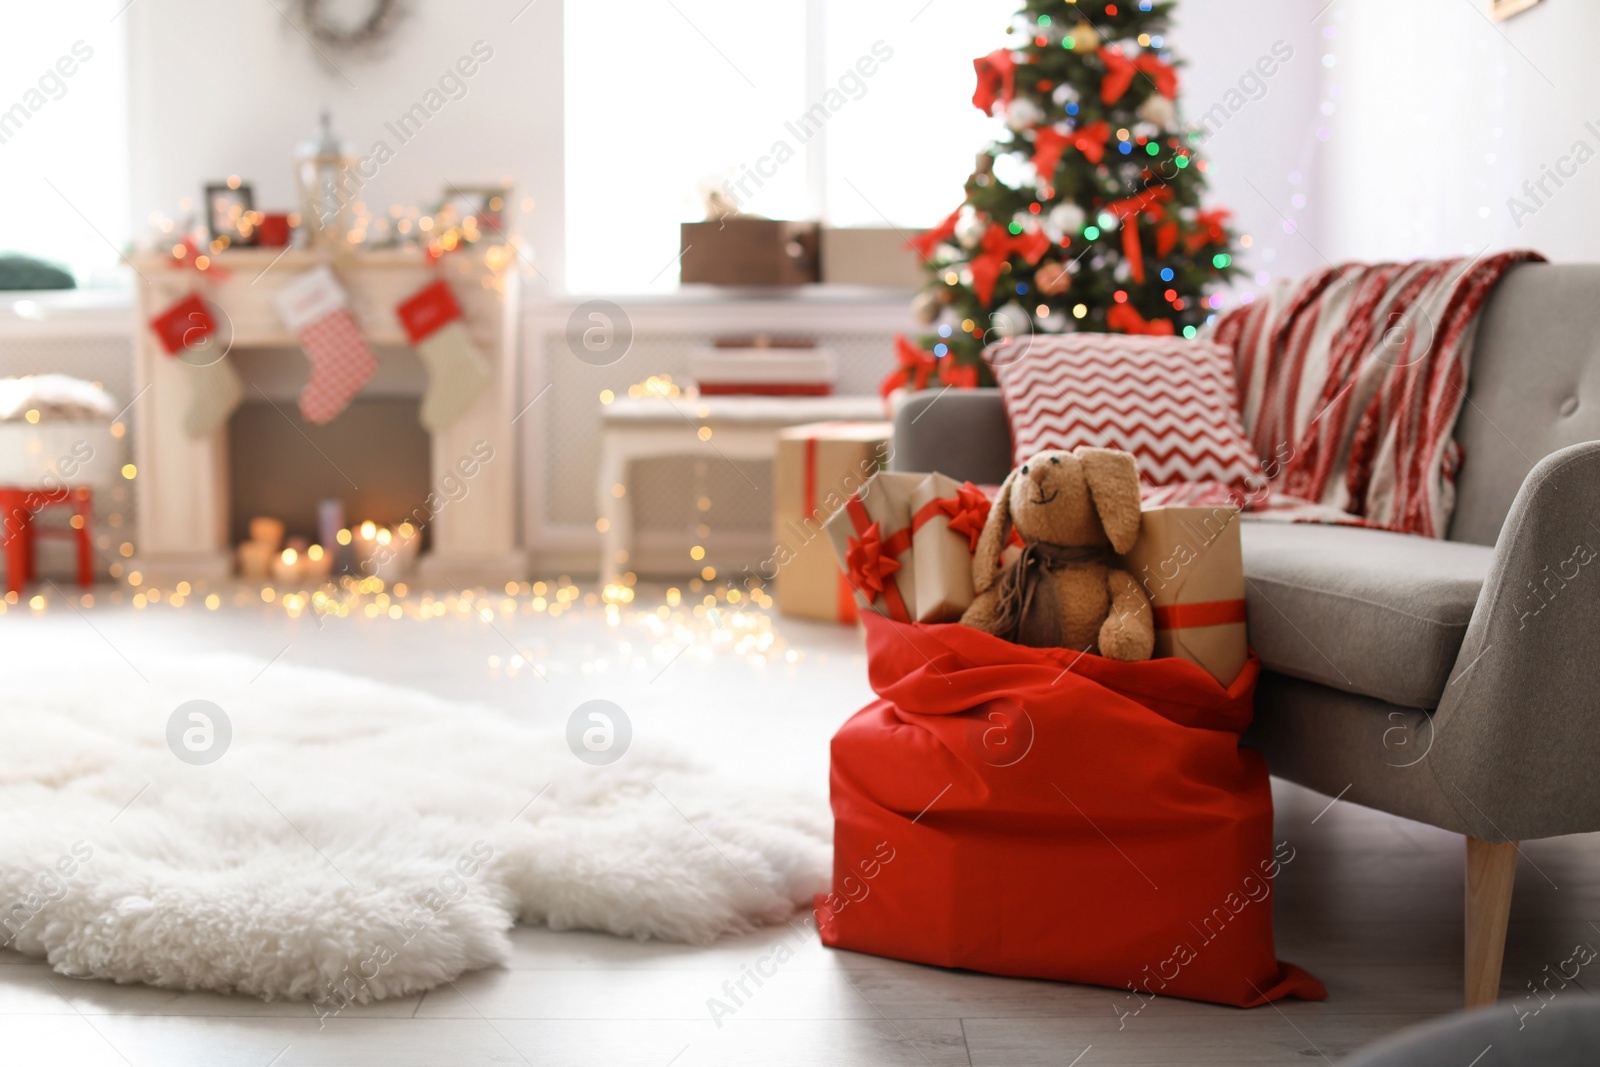 Photo of Room interior with Christmas tree and Santa's bag of gifts